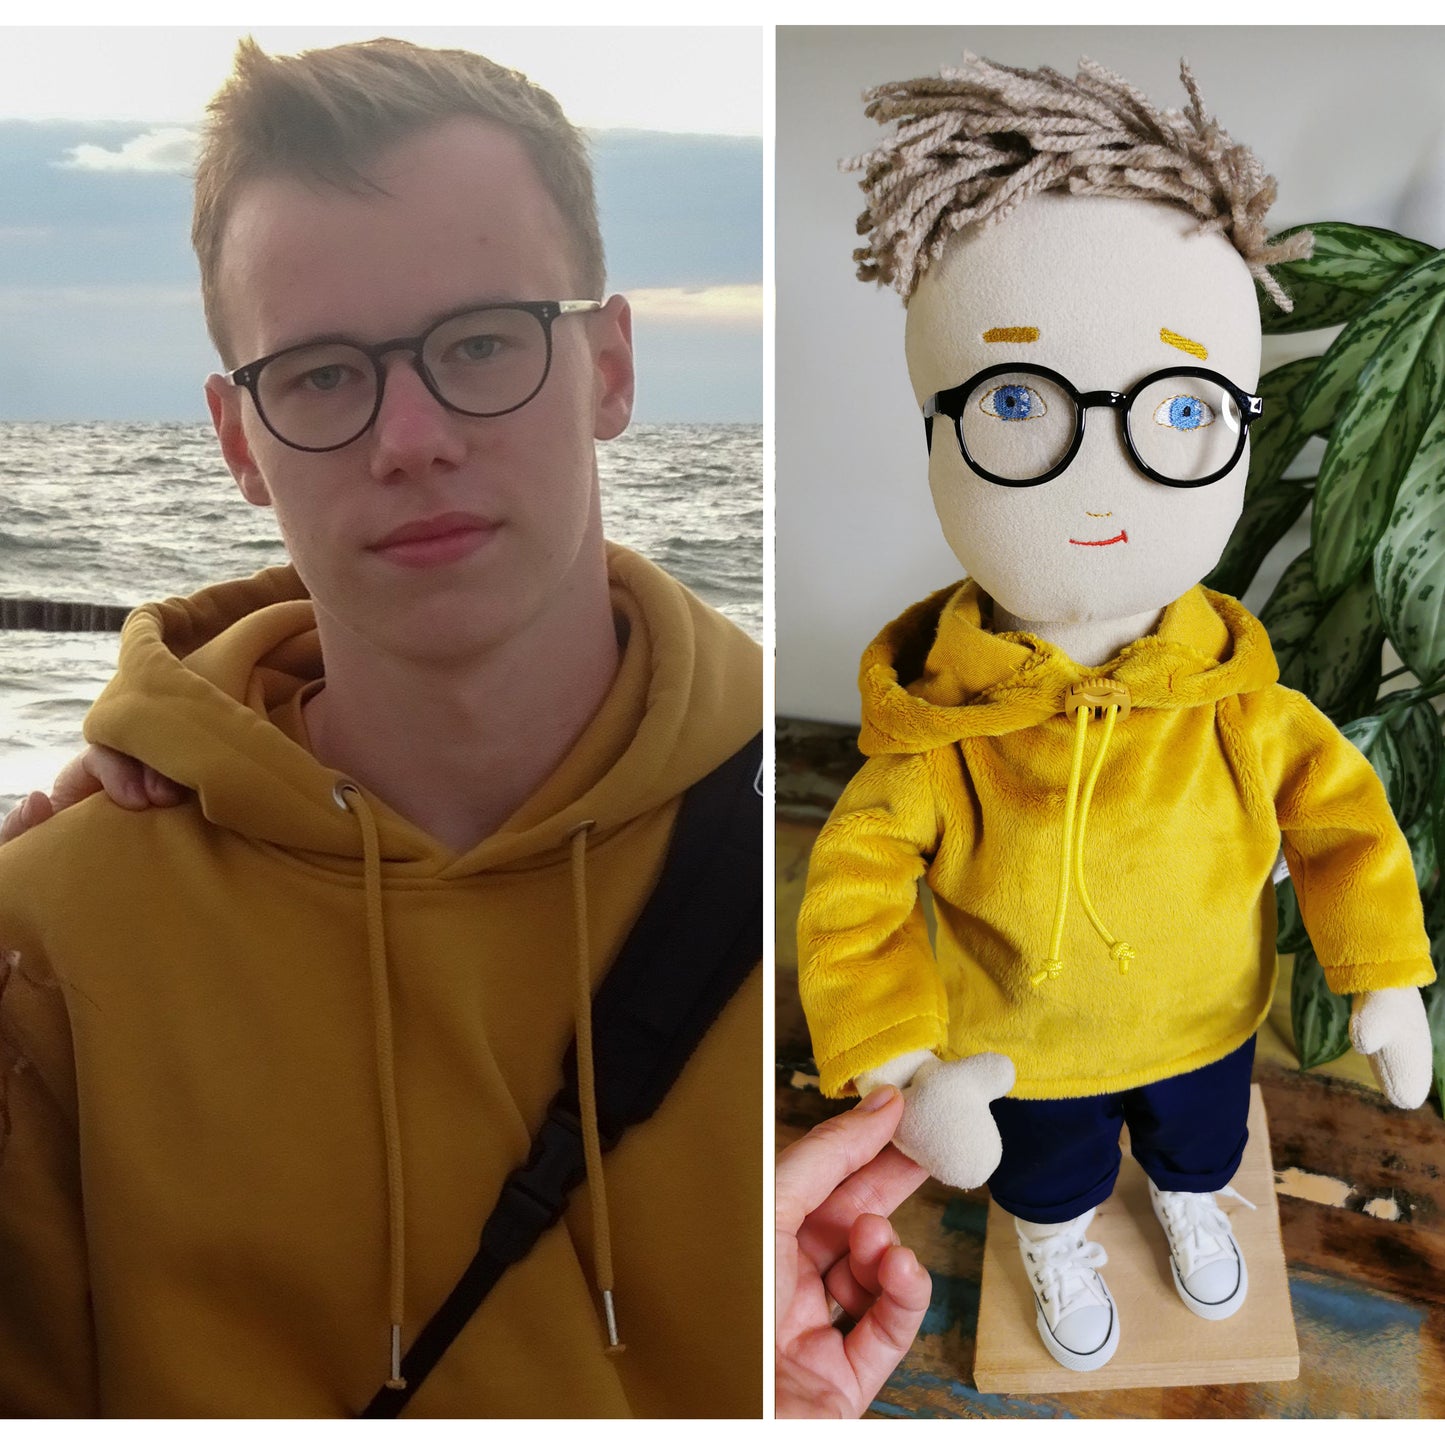 Personalized Portrait Doll based on photos, selfie cloth doll, likeness doll with glasses 50 cm